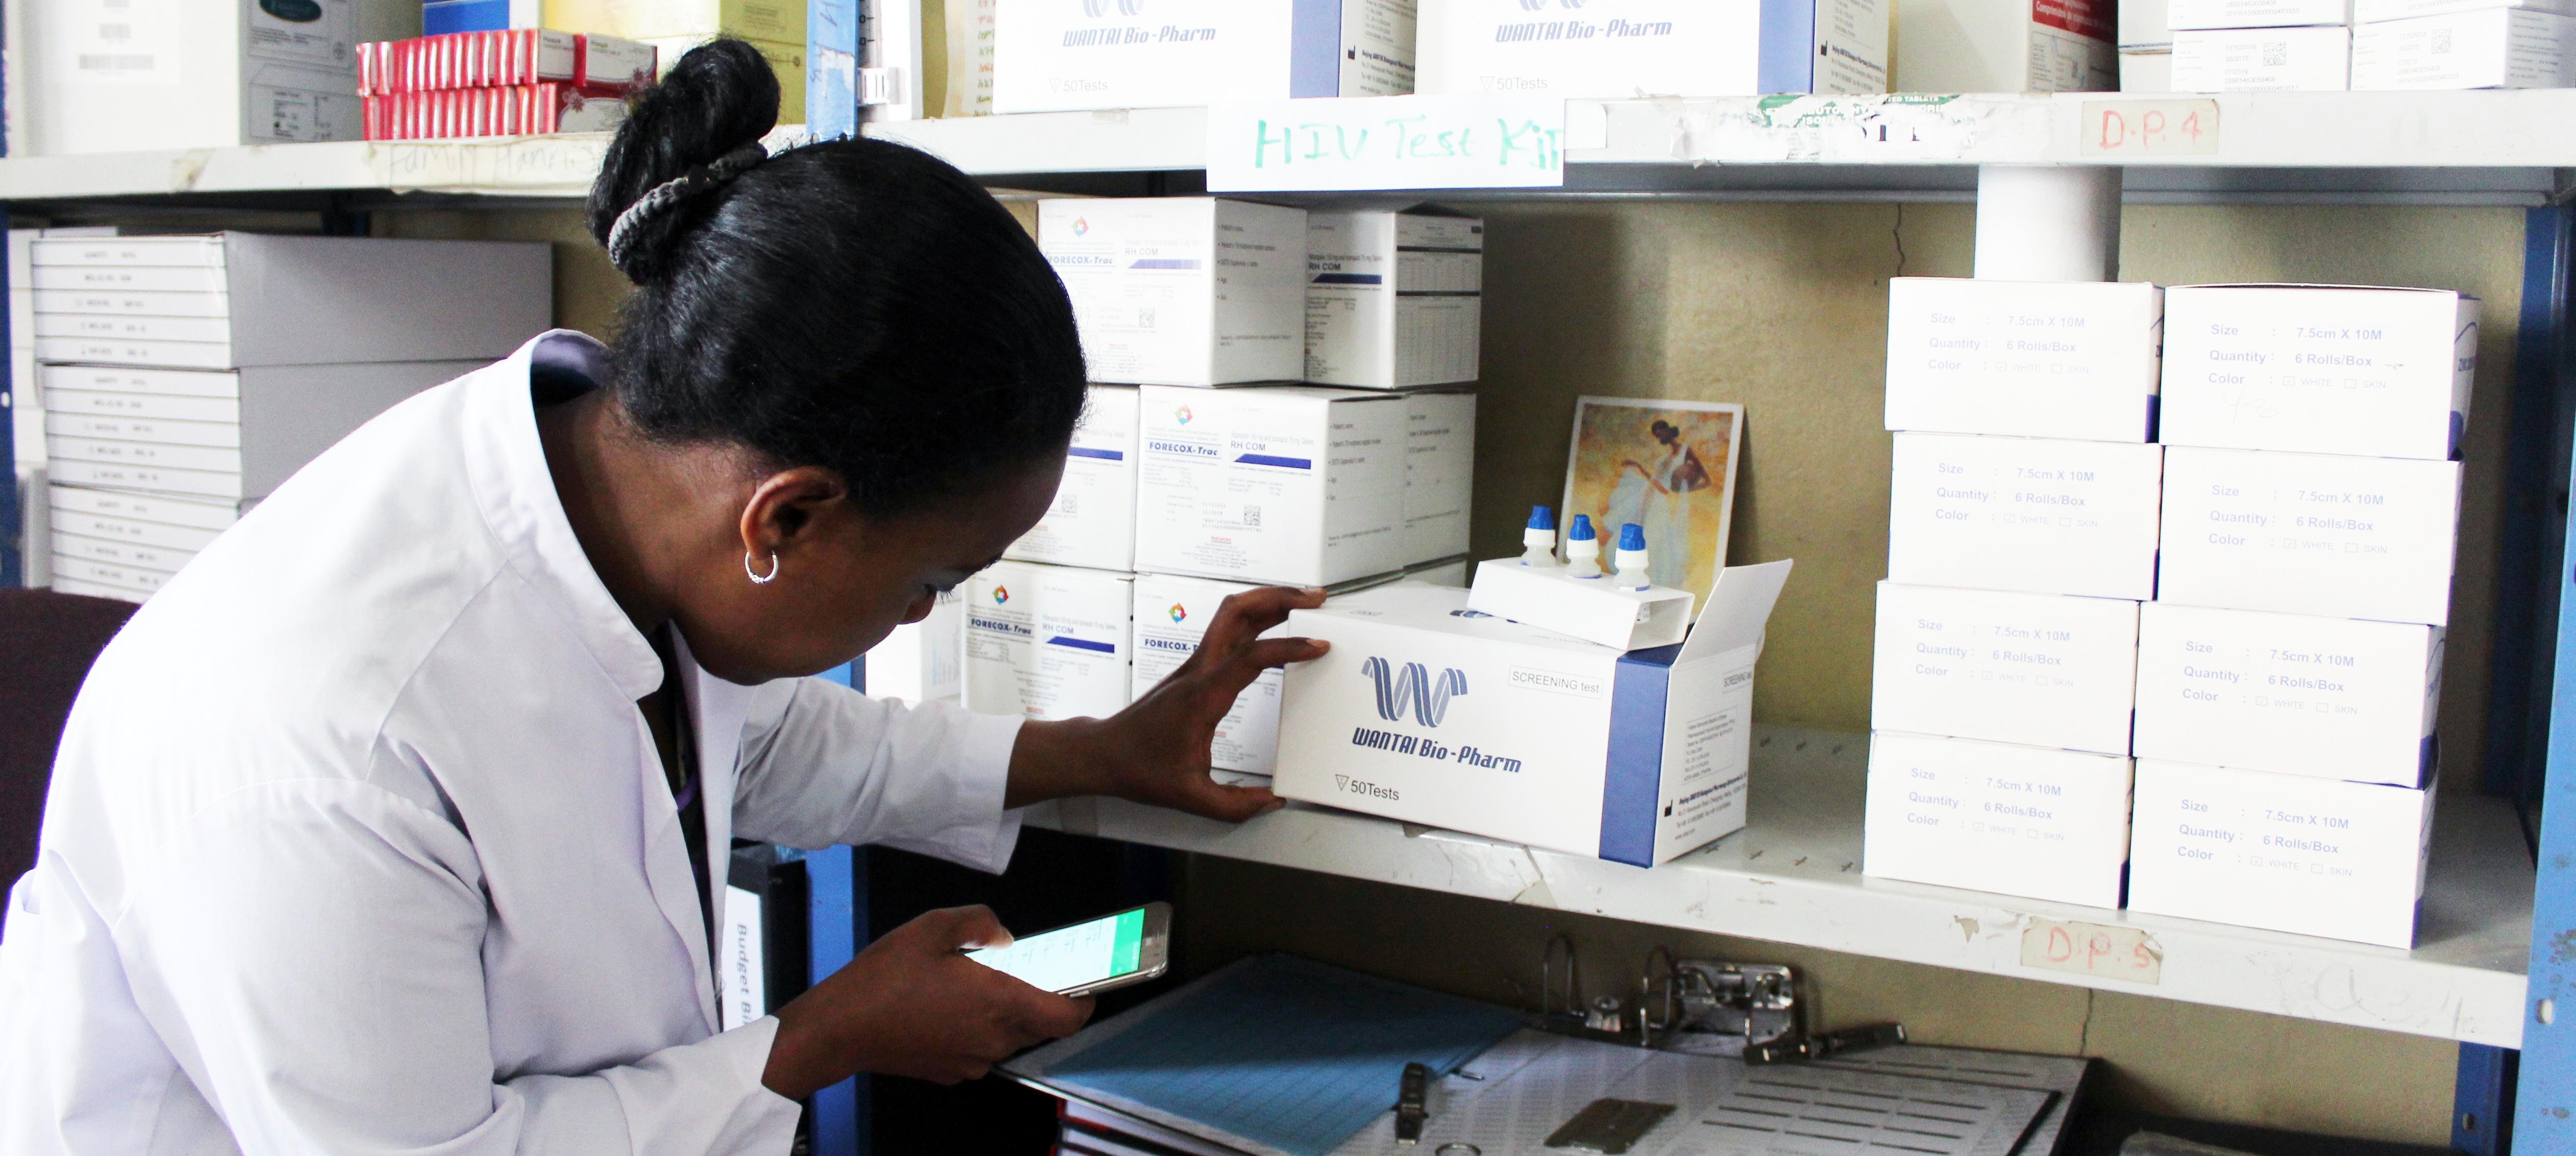 A woman checks stock levels at a pharmacy